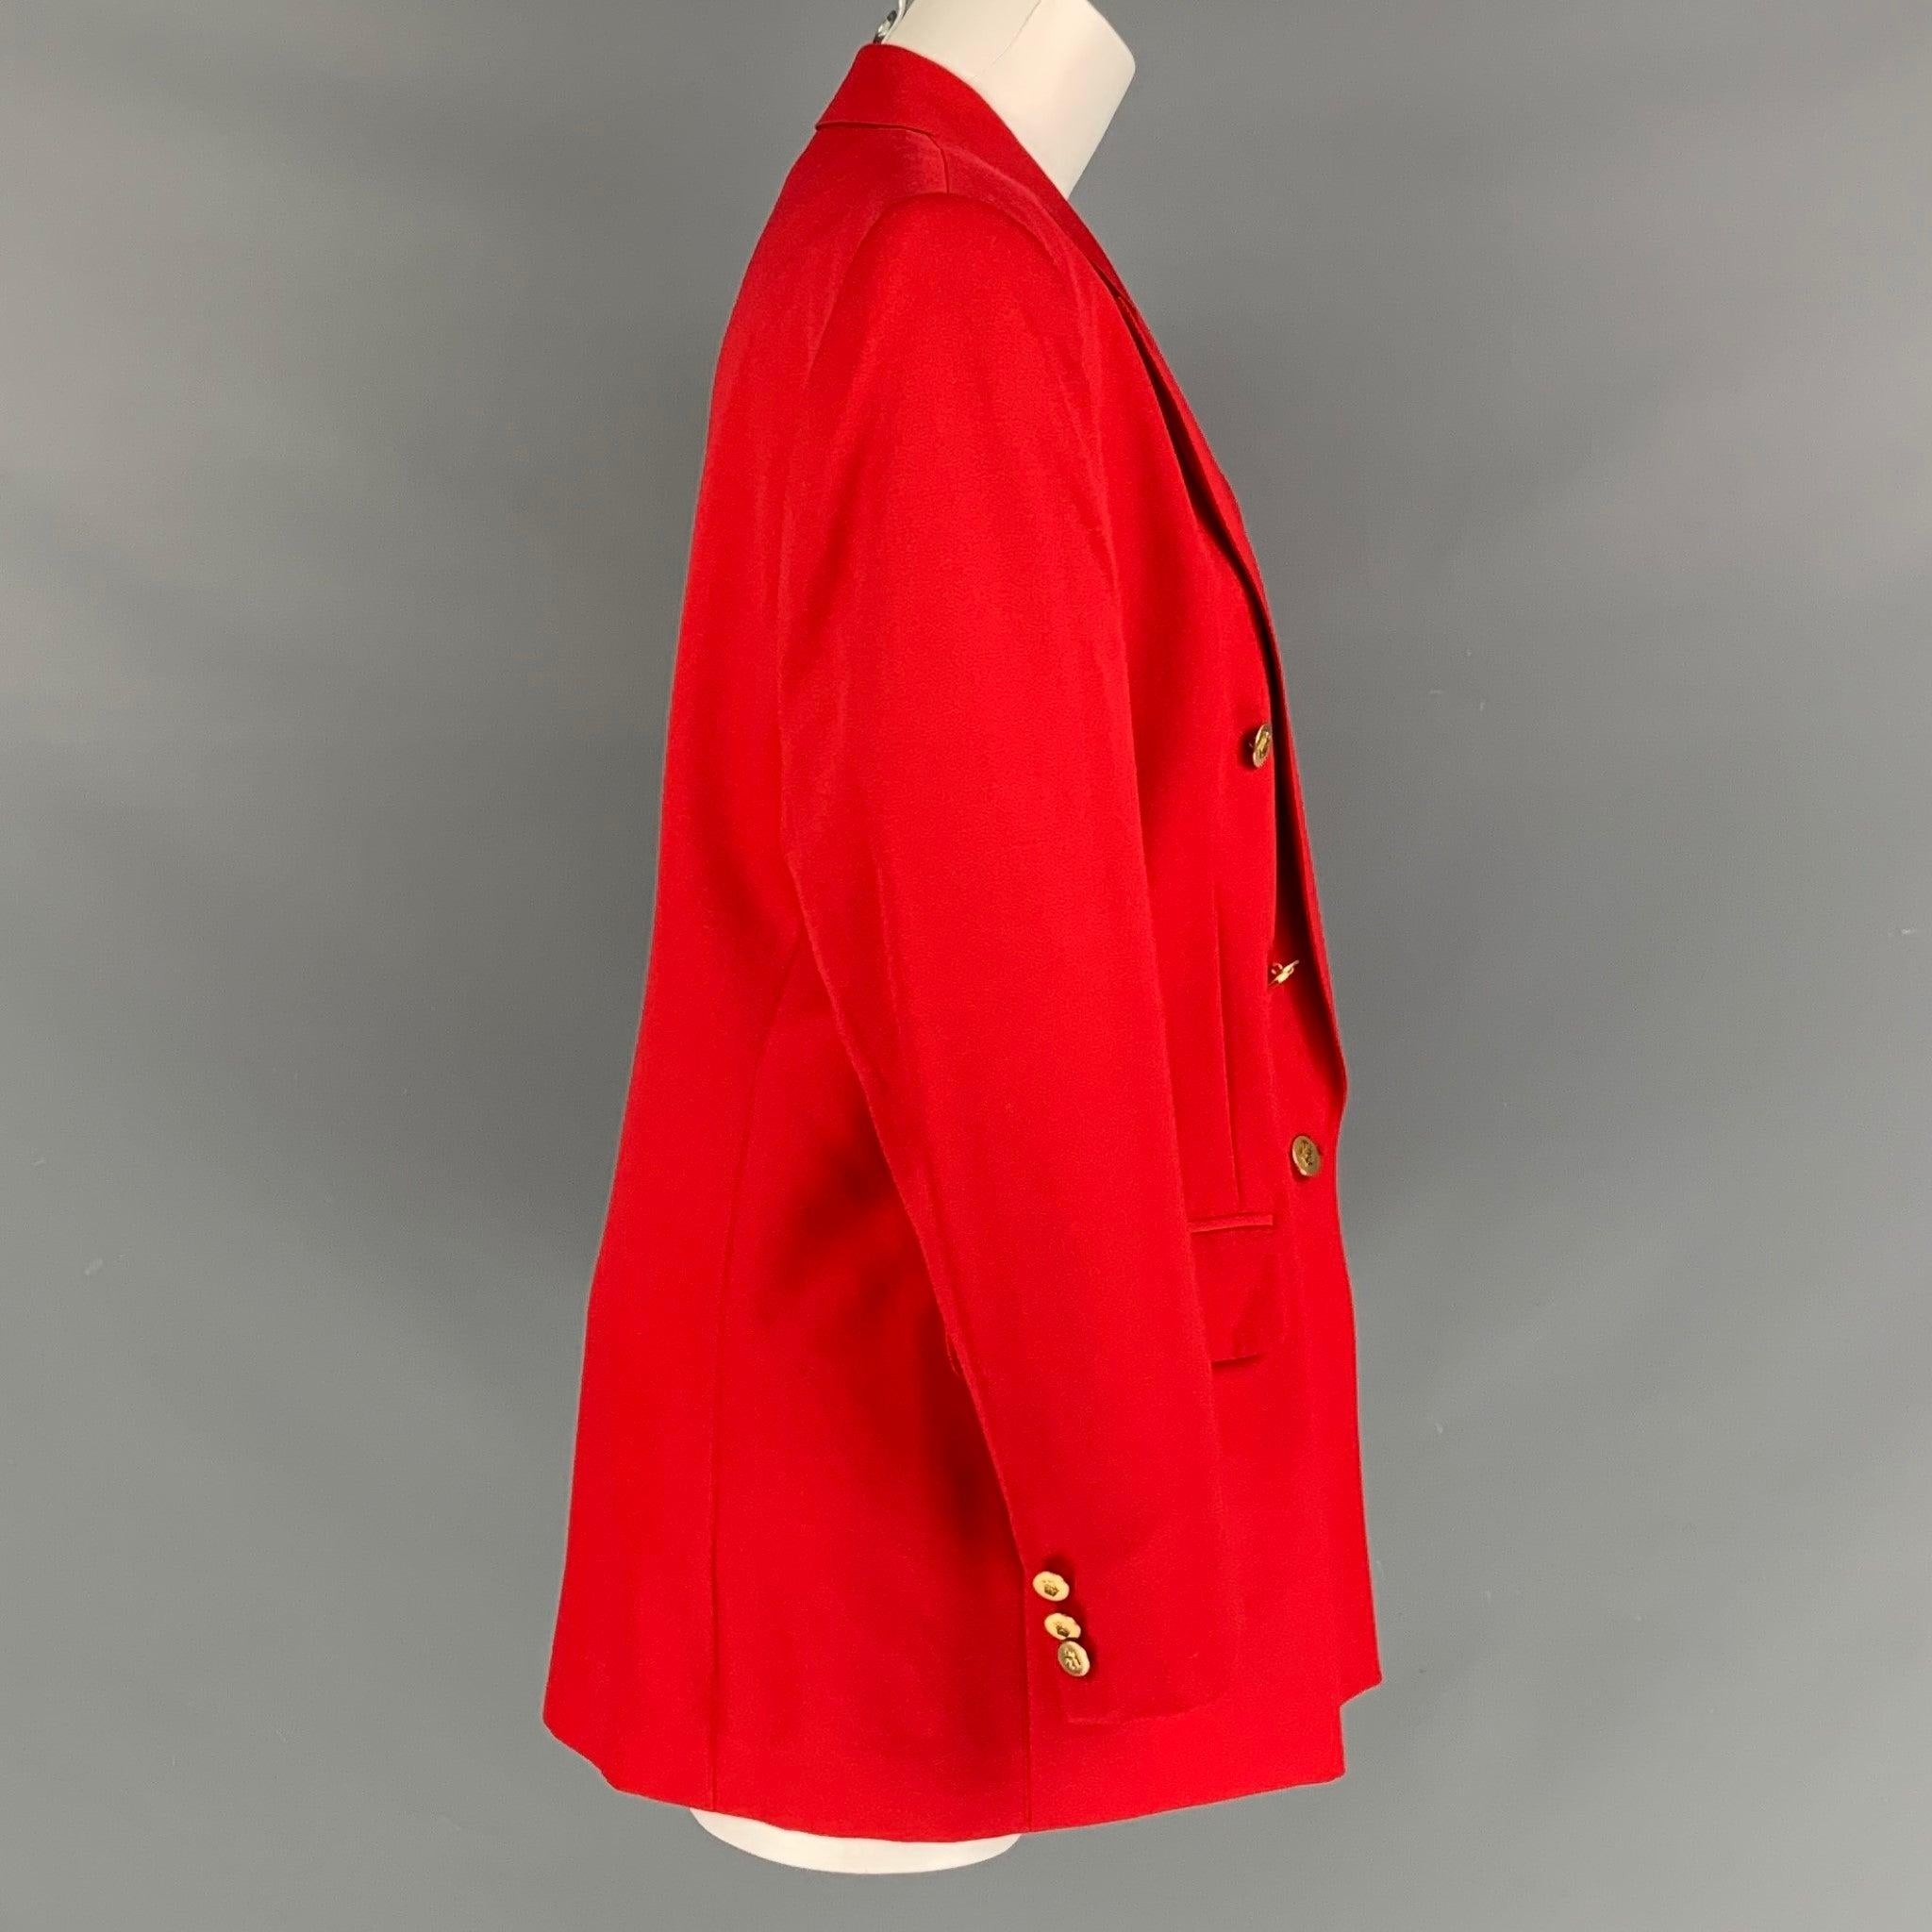 VINTAGE AQUASCUTUM double breasted blazer comes in a red wool fabric featuring a peak lapels with flap pockets, shoulder pads and gold insignia buttons. Made in Canada.
New with tags.  

Marked:   12 

Measurements: 
 
Shoulder: 17 inches Bust:
41